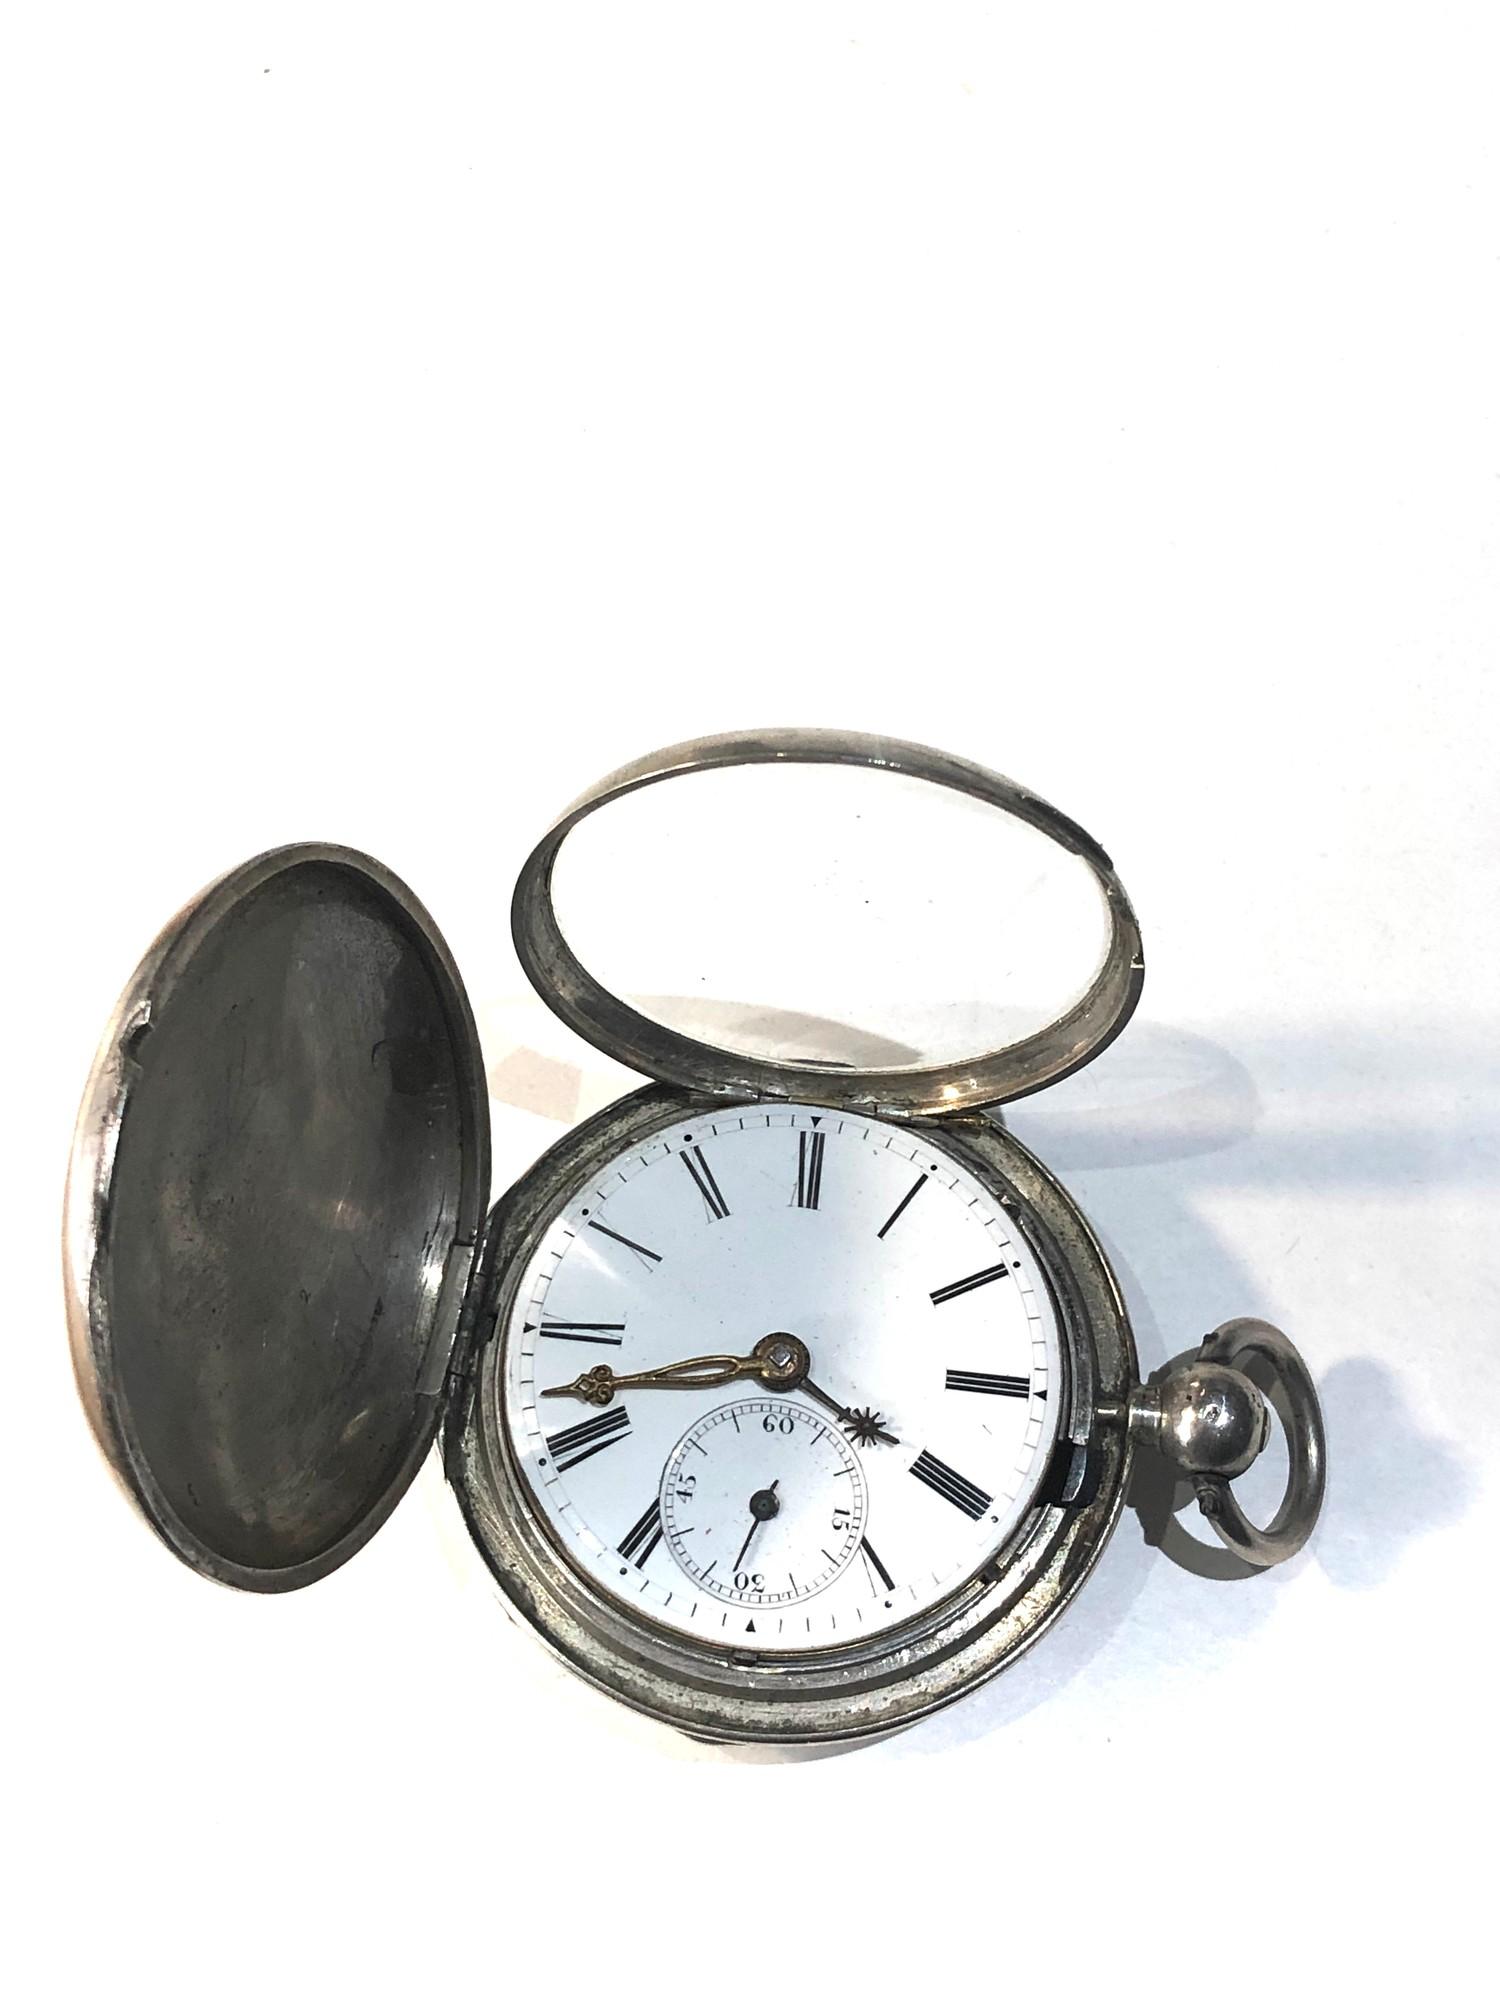 Antique verge Fusee silver full hunter pocket watch the watch is full wound and does not tick the - Image 2 of 10